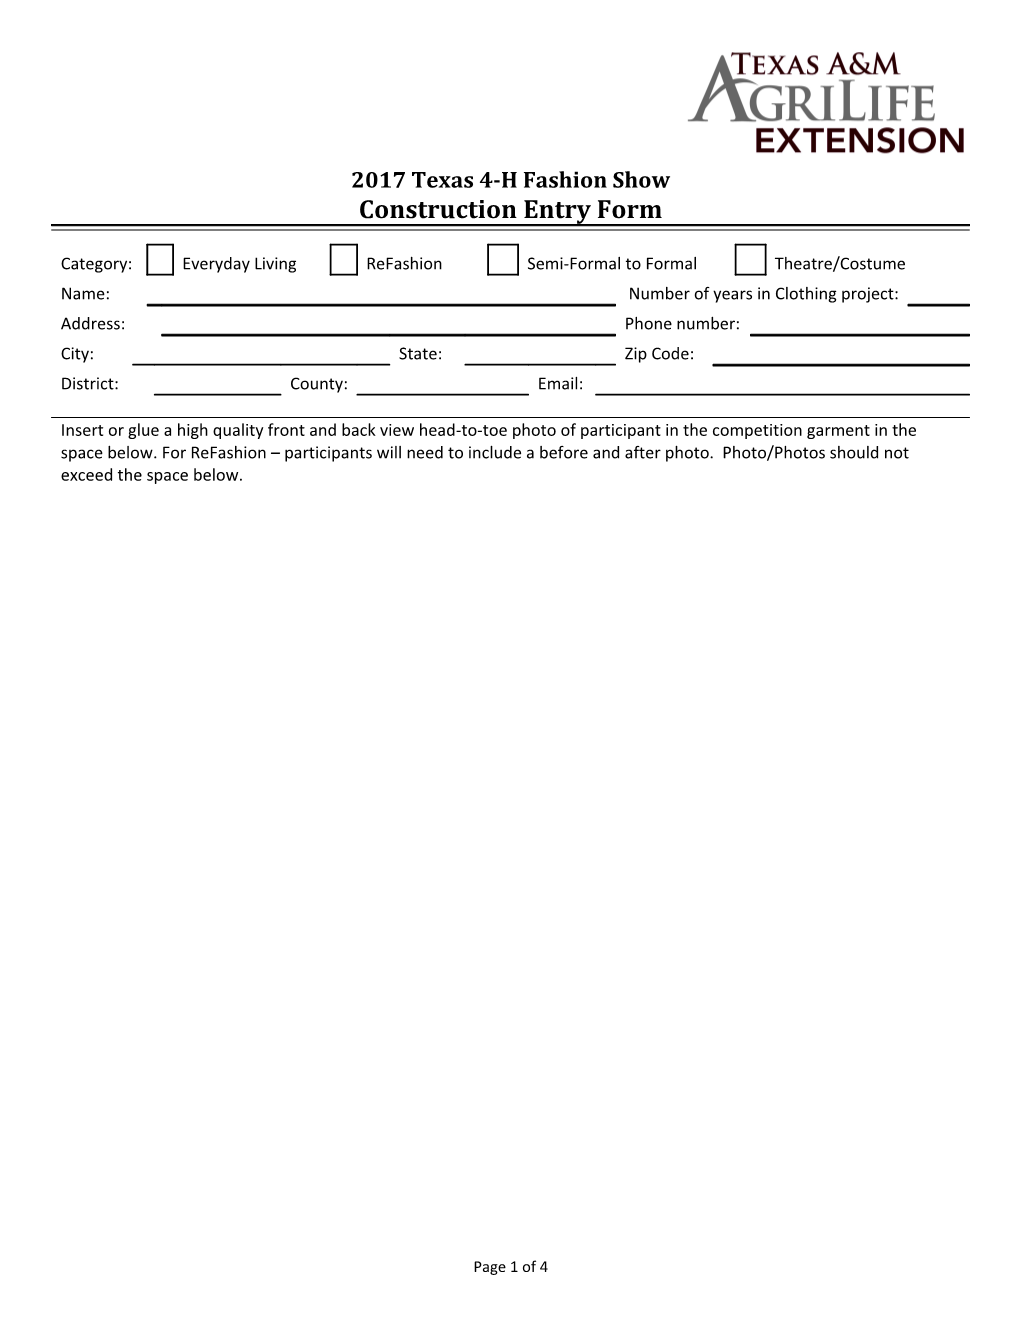 2017 Texas 4-H Fashion Show Construction Entry Form